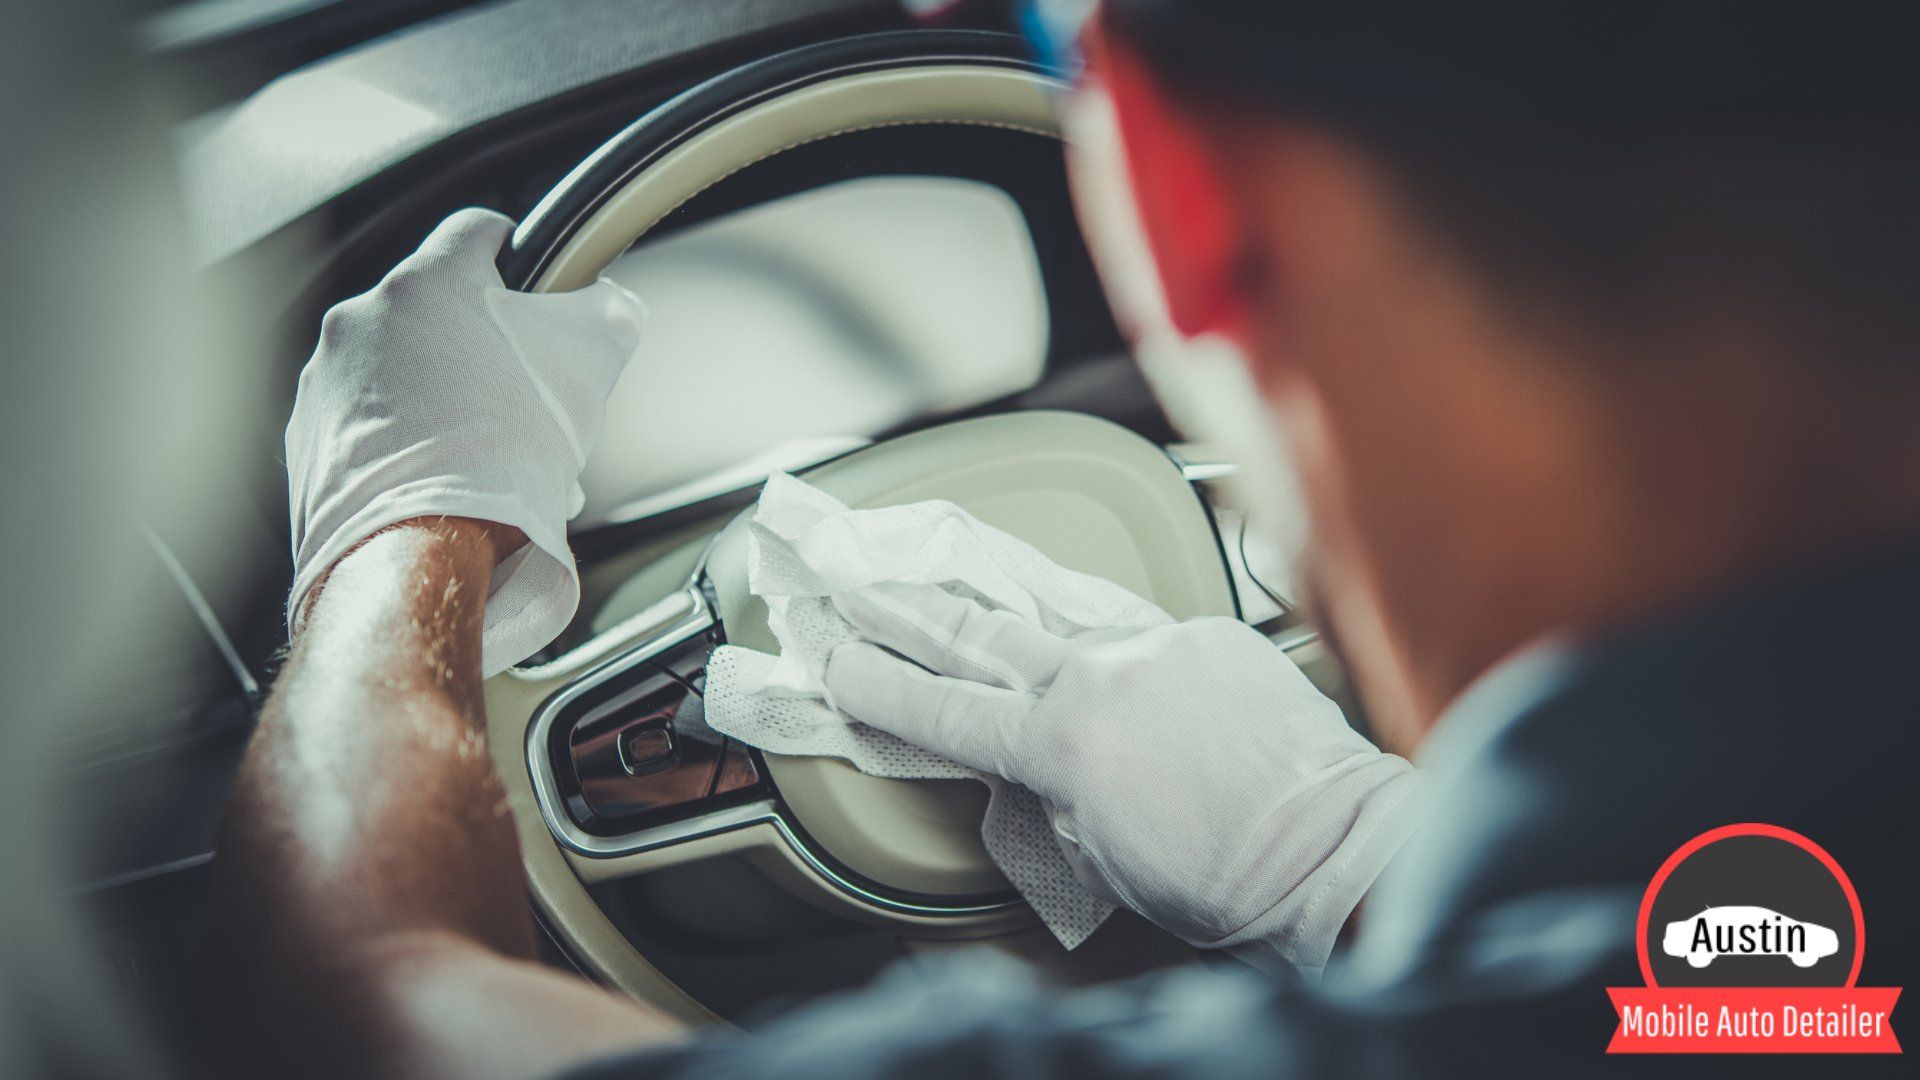 An Expert in Car Detailing Performing Professional Car Detailing Services in Texas